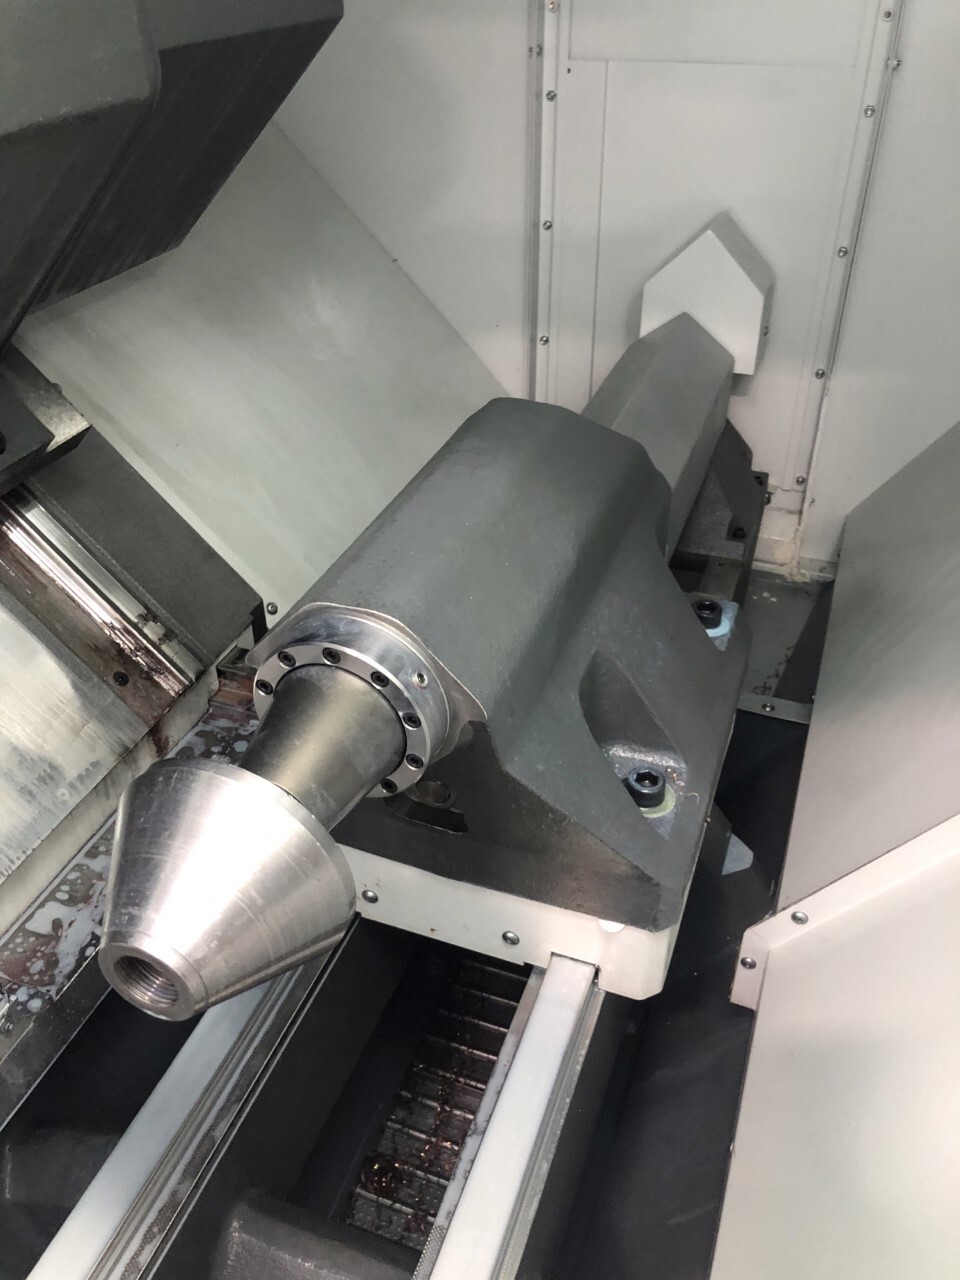 2019 HAAS ST 30Y CNC LATHES MULTI AXIS | Quick Machinery Sales, INC.